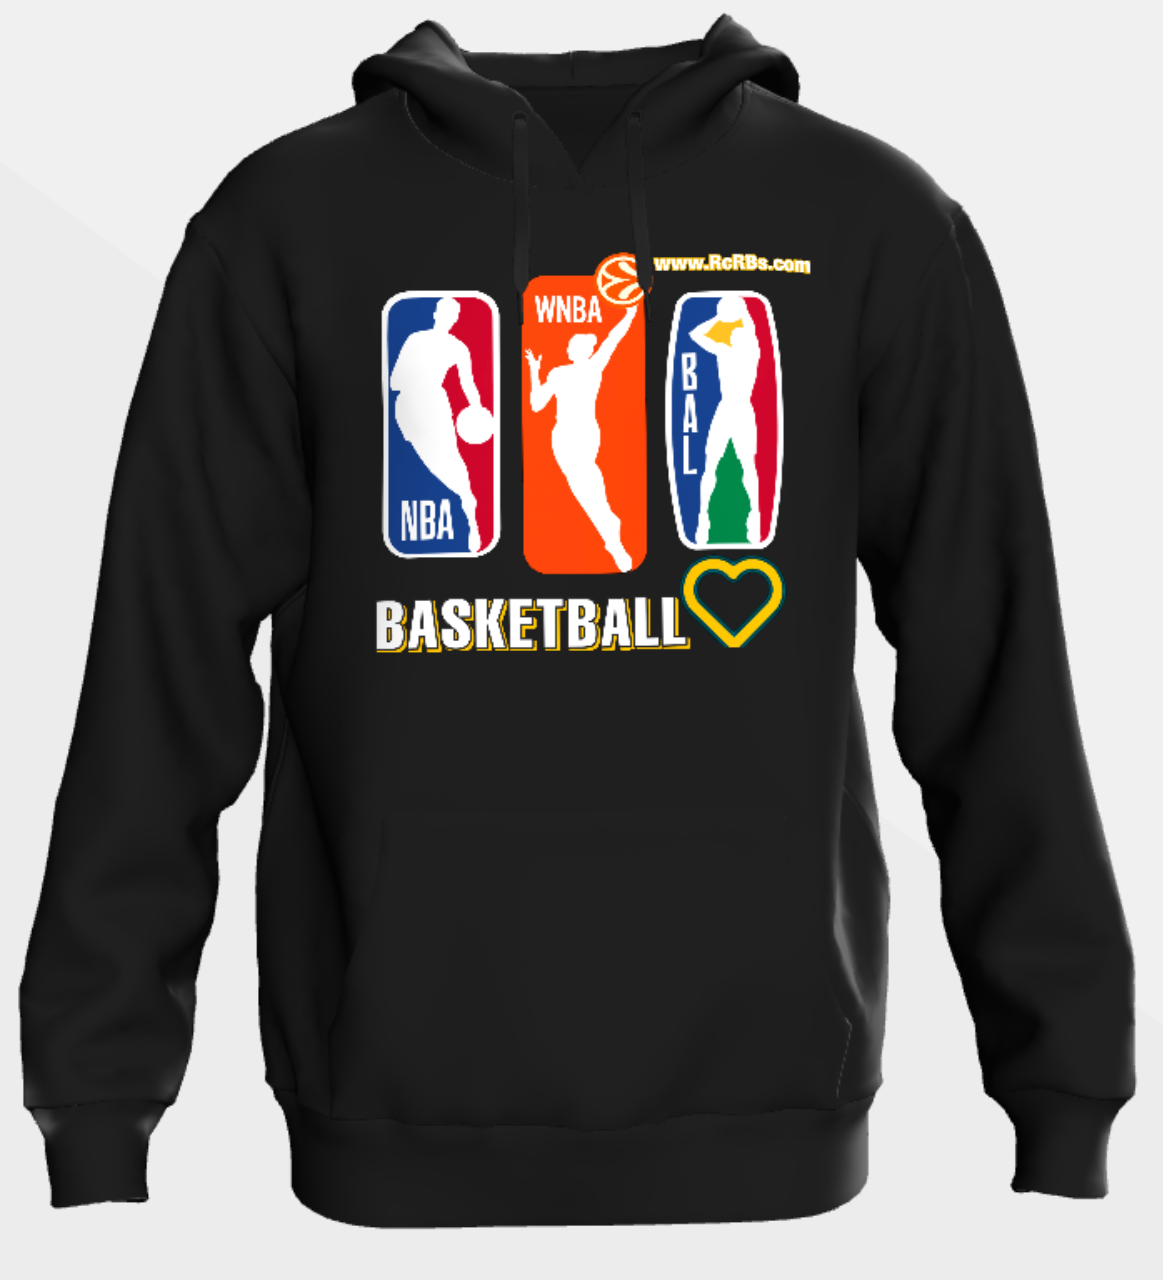 "Evry1's Brand" Rich City Hoodie w/ "BasketBall African League" BHM